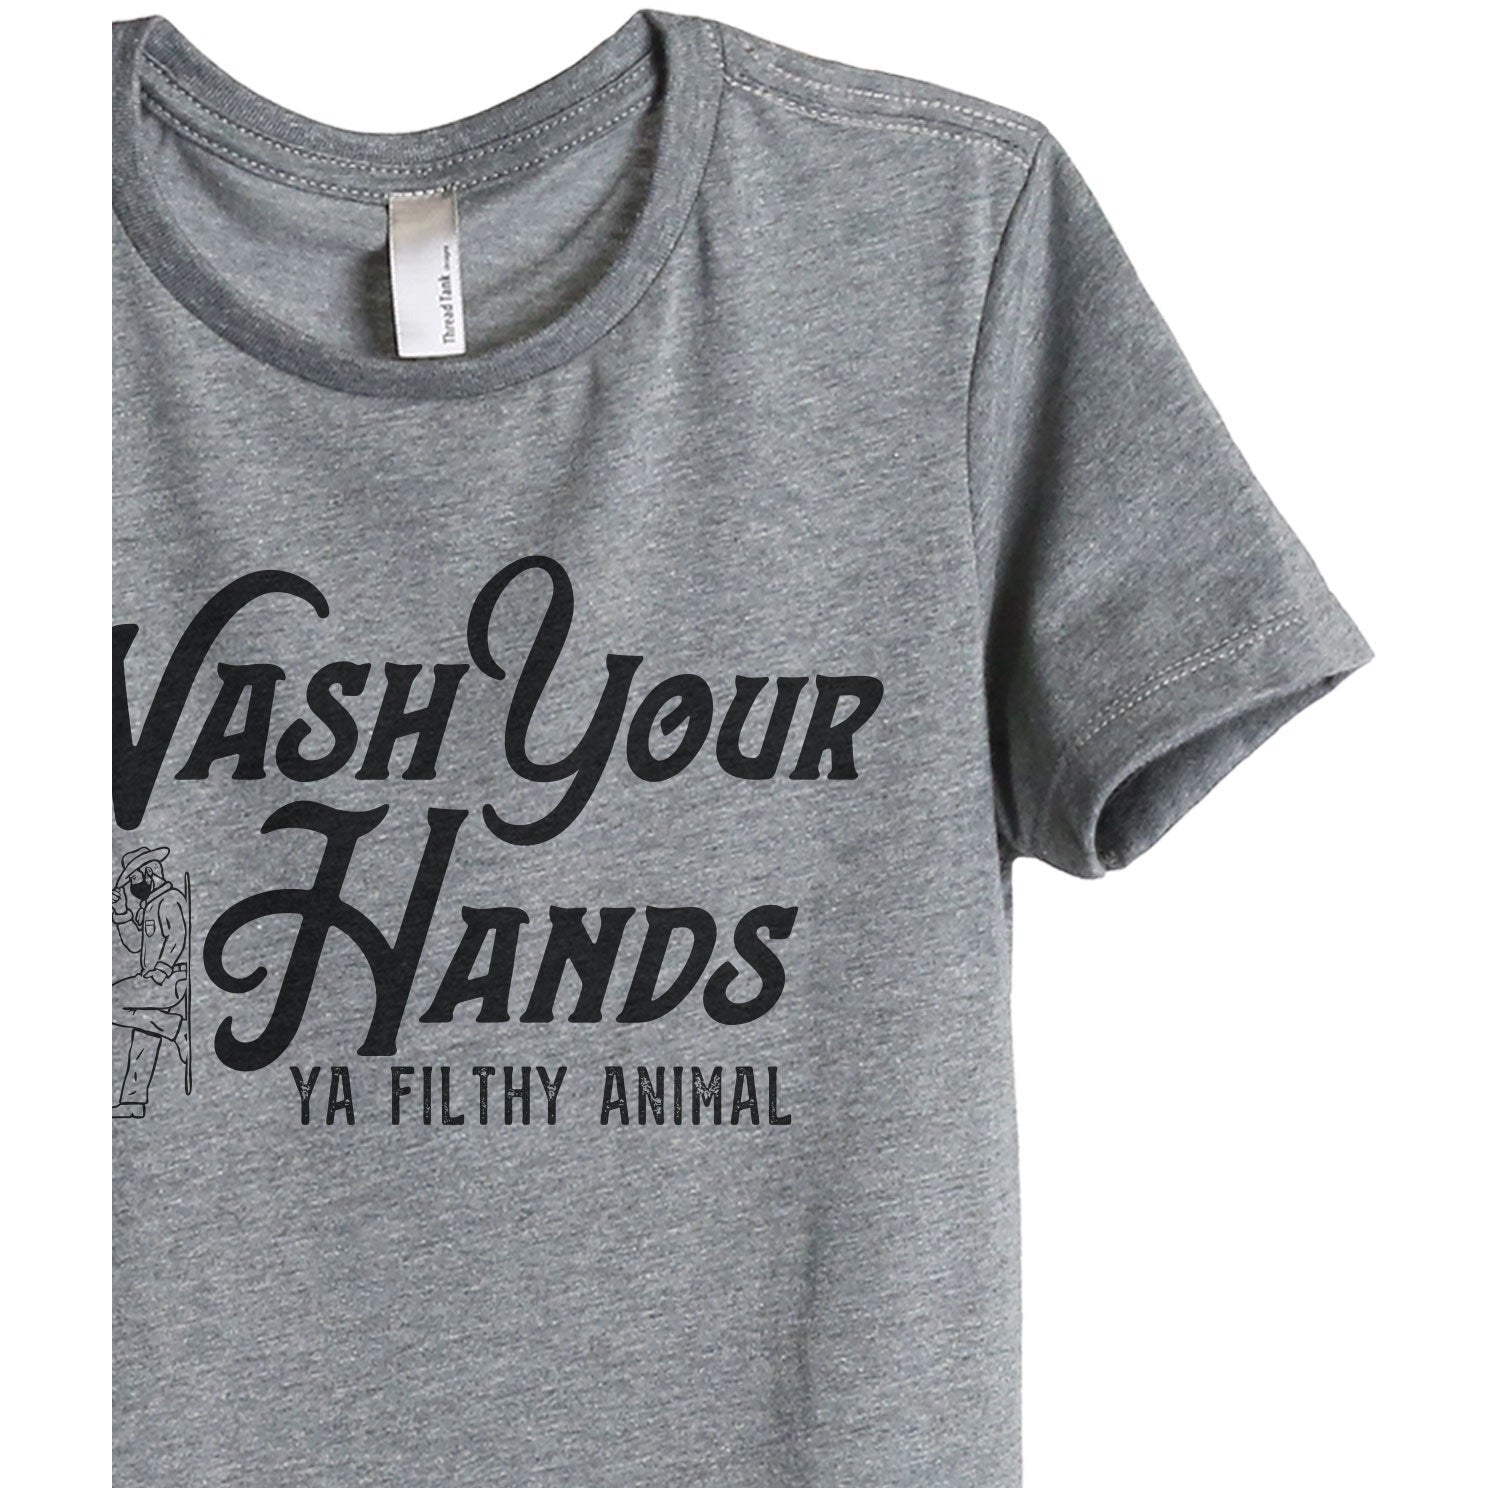 Wash Your Hands Ya Filthy Animal - Stories You Can Wear